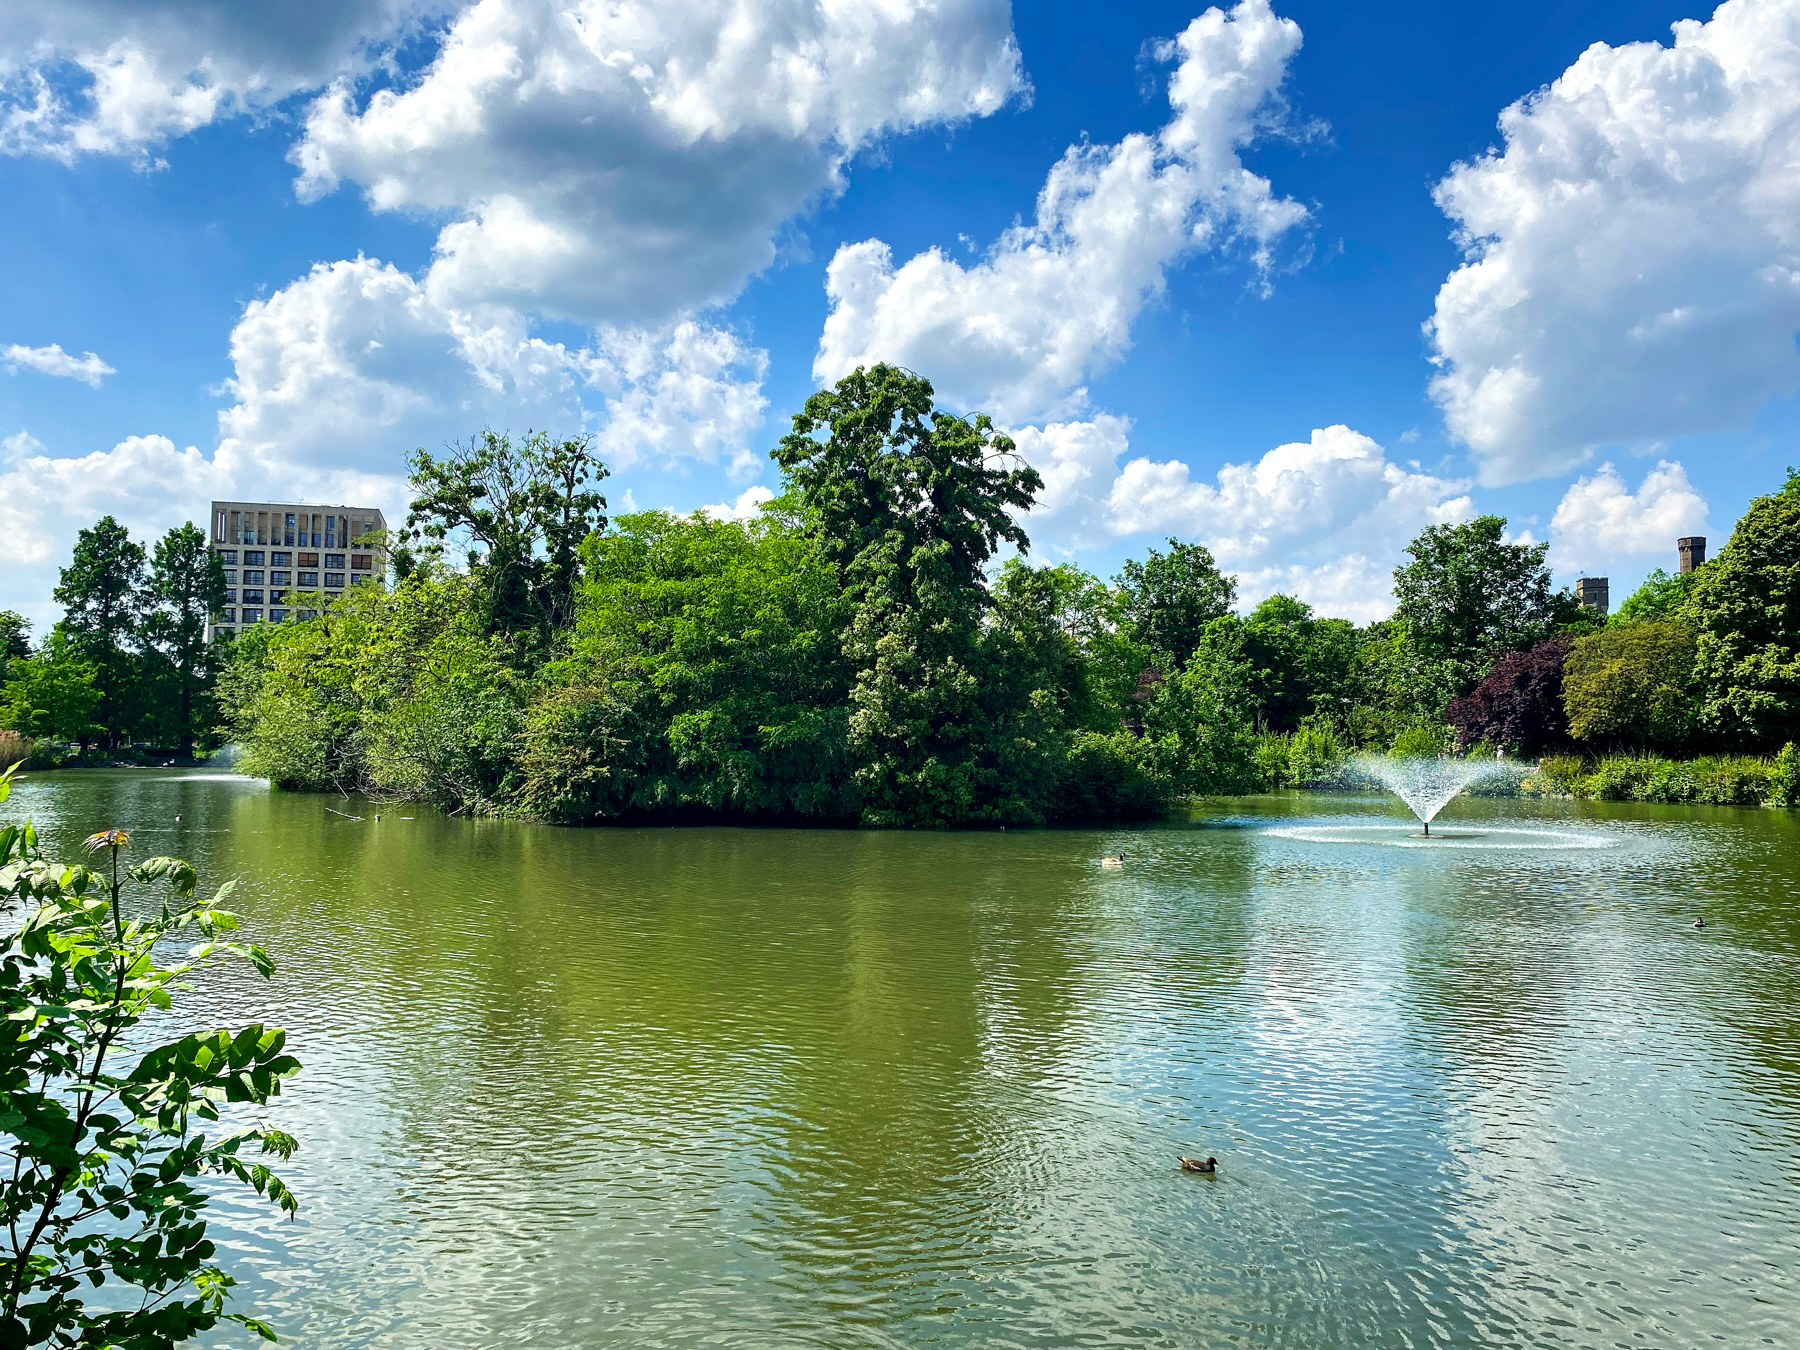 A scenic pond surrounded by lush green trees and vegetation under a partly cloudy sky. A building is visible in the background. A water fountain in the pond creates a gentle spray. Waterfowl are swimming on the water's surface.